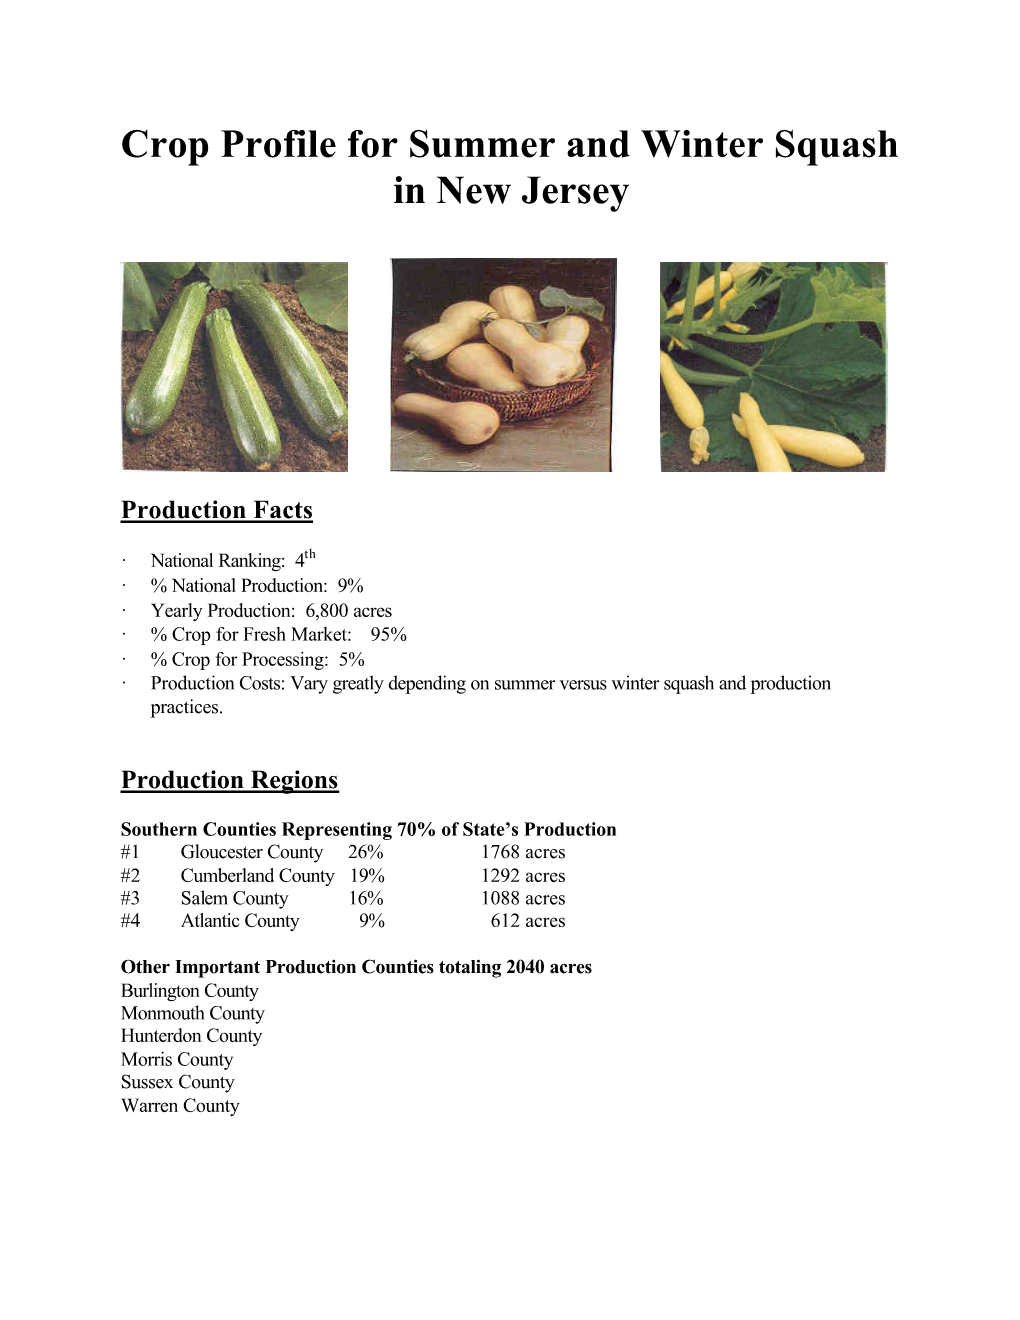 Crop Profile for Summer and Winter Squash in New Jersey